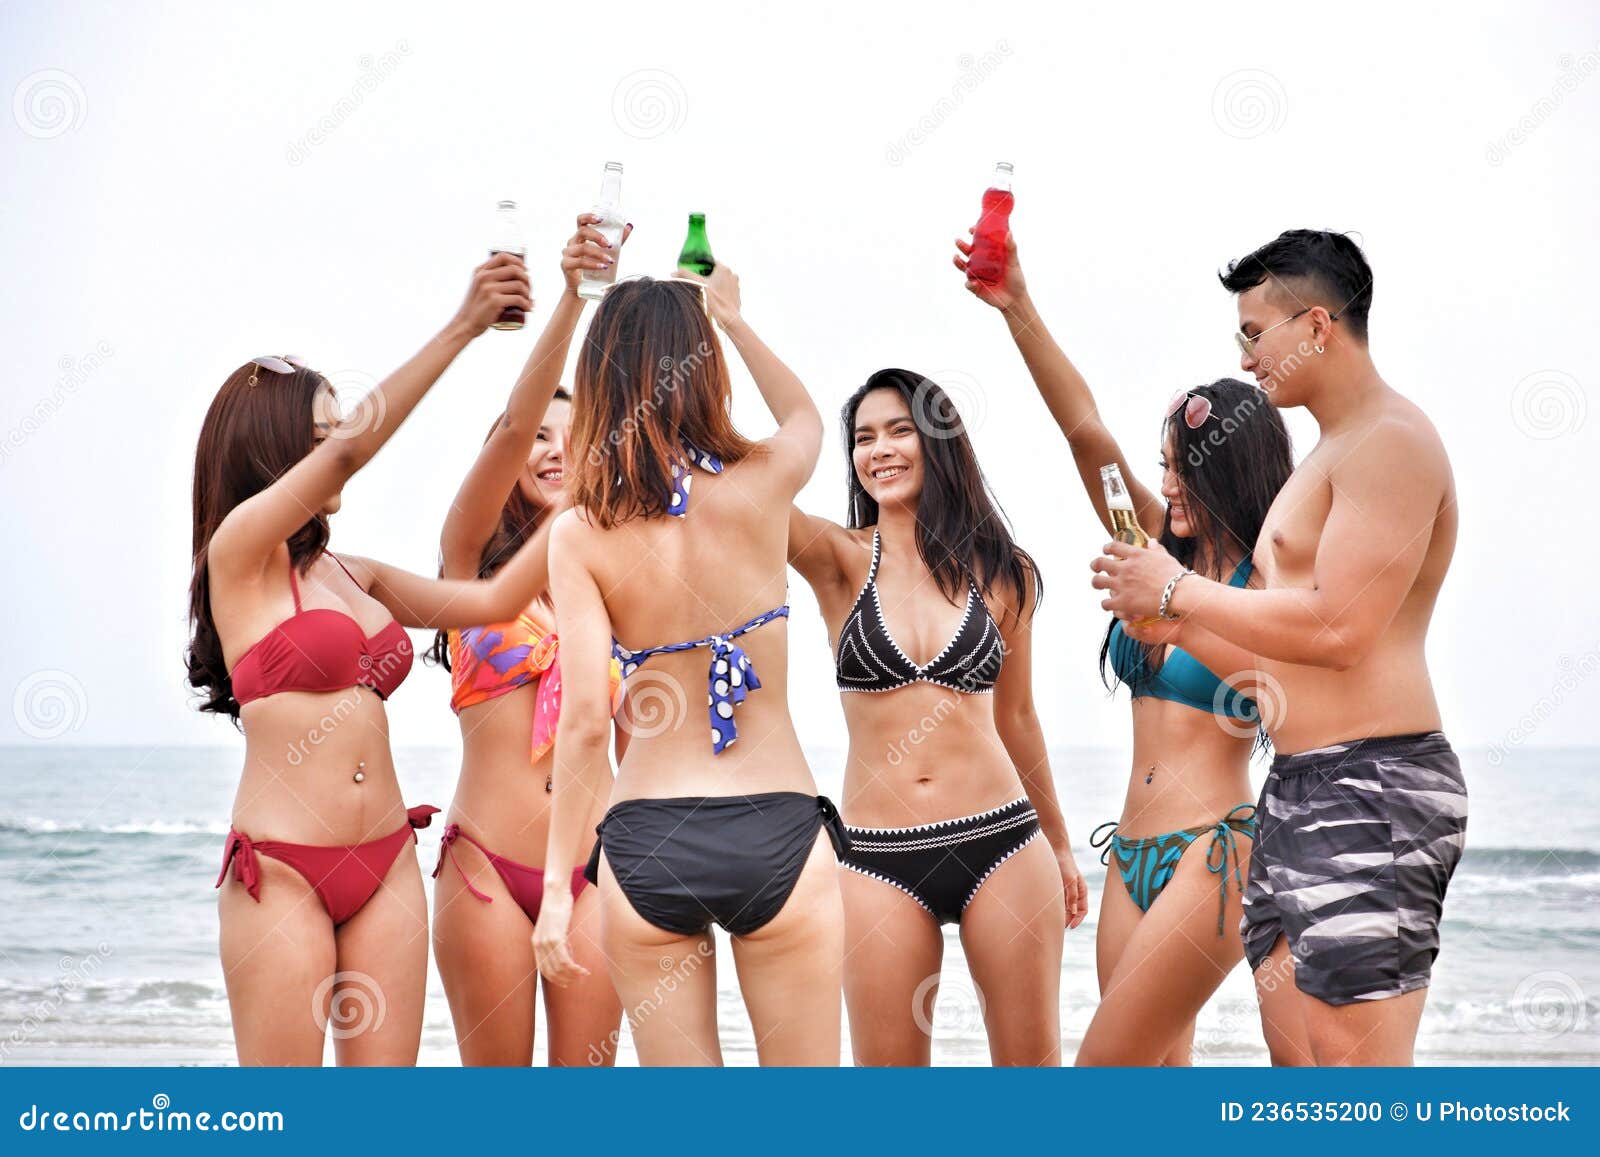 Bikini Party Seaside Enjoy Meeting Group Friends Having Fun Dancing and  Drinking Beverage on the Beach, Happy Life on Summer Stock Photo - Image of  beautiful, attractive: 236535200